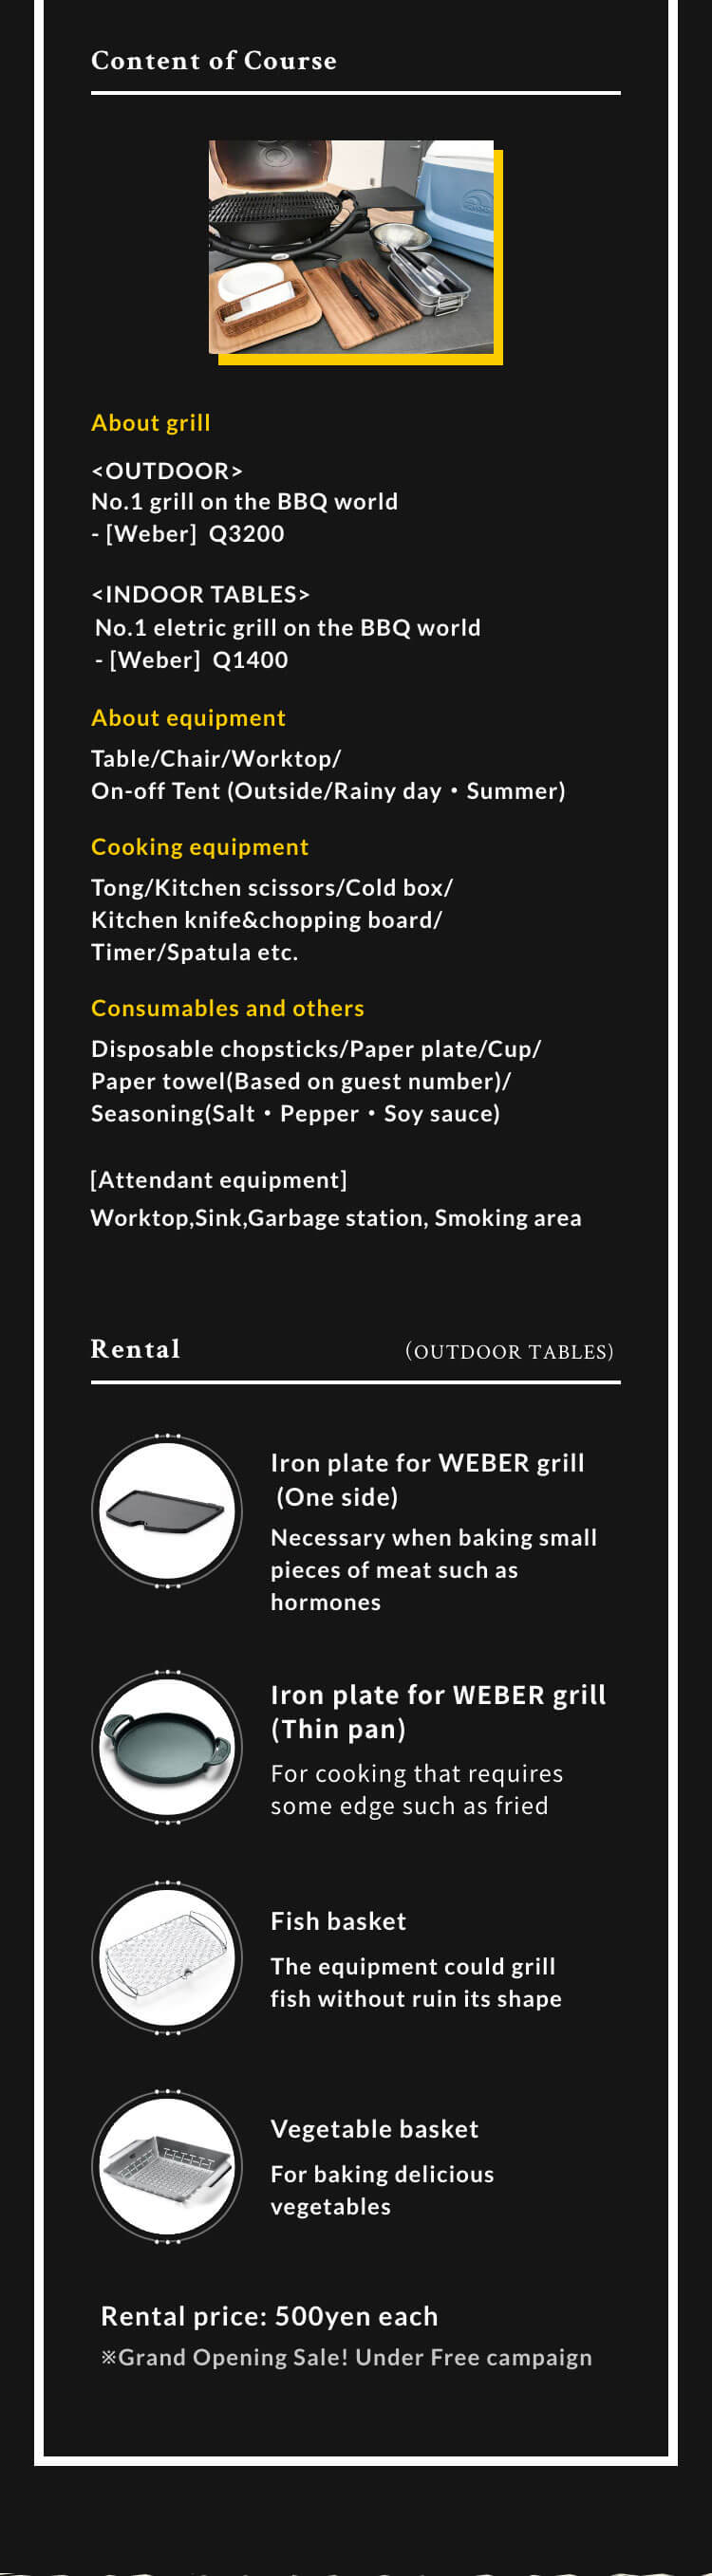 Content of Course About grill <OUTDOOR> No.1 gas grill on the BBQ world [Weber]  Q3200 with lid/Fuel <INDOOR TABLES> No.1 eletric grill on the BBQ world [Weber] Q1400 About equipment Table/Chair/Worktop/On-off Tent (Outside/Rainy day・Summer) Cooking equipment Tong/Kitchen scissors/Cold box/Kitchen knife&chopping board/Timer/Spatula etc. Consumables and others Disposable chopsticks/Paper plate/Cup/Paper towel(Based on guest number)/Seasoning(Salt・Pepper・Soy sauce) Attendant equipment Worktop,Sink,Garbage station, Smoking area Rental （OUTDOOR TABLES) Iron plate for WEBER grill (One side) Necessary when baking small pieces of meat such as hormones Iron plate for WEBER grill(Thin pan) For cooking that requires some edge such as fried noodles Fish basket The equipment could grill fish without ruin its shape The equipment could grill fish without ruin its shape For baking delicious vegetables Rental price: 500yen each